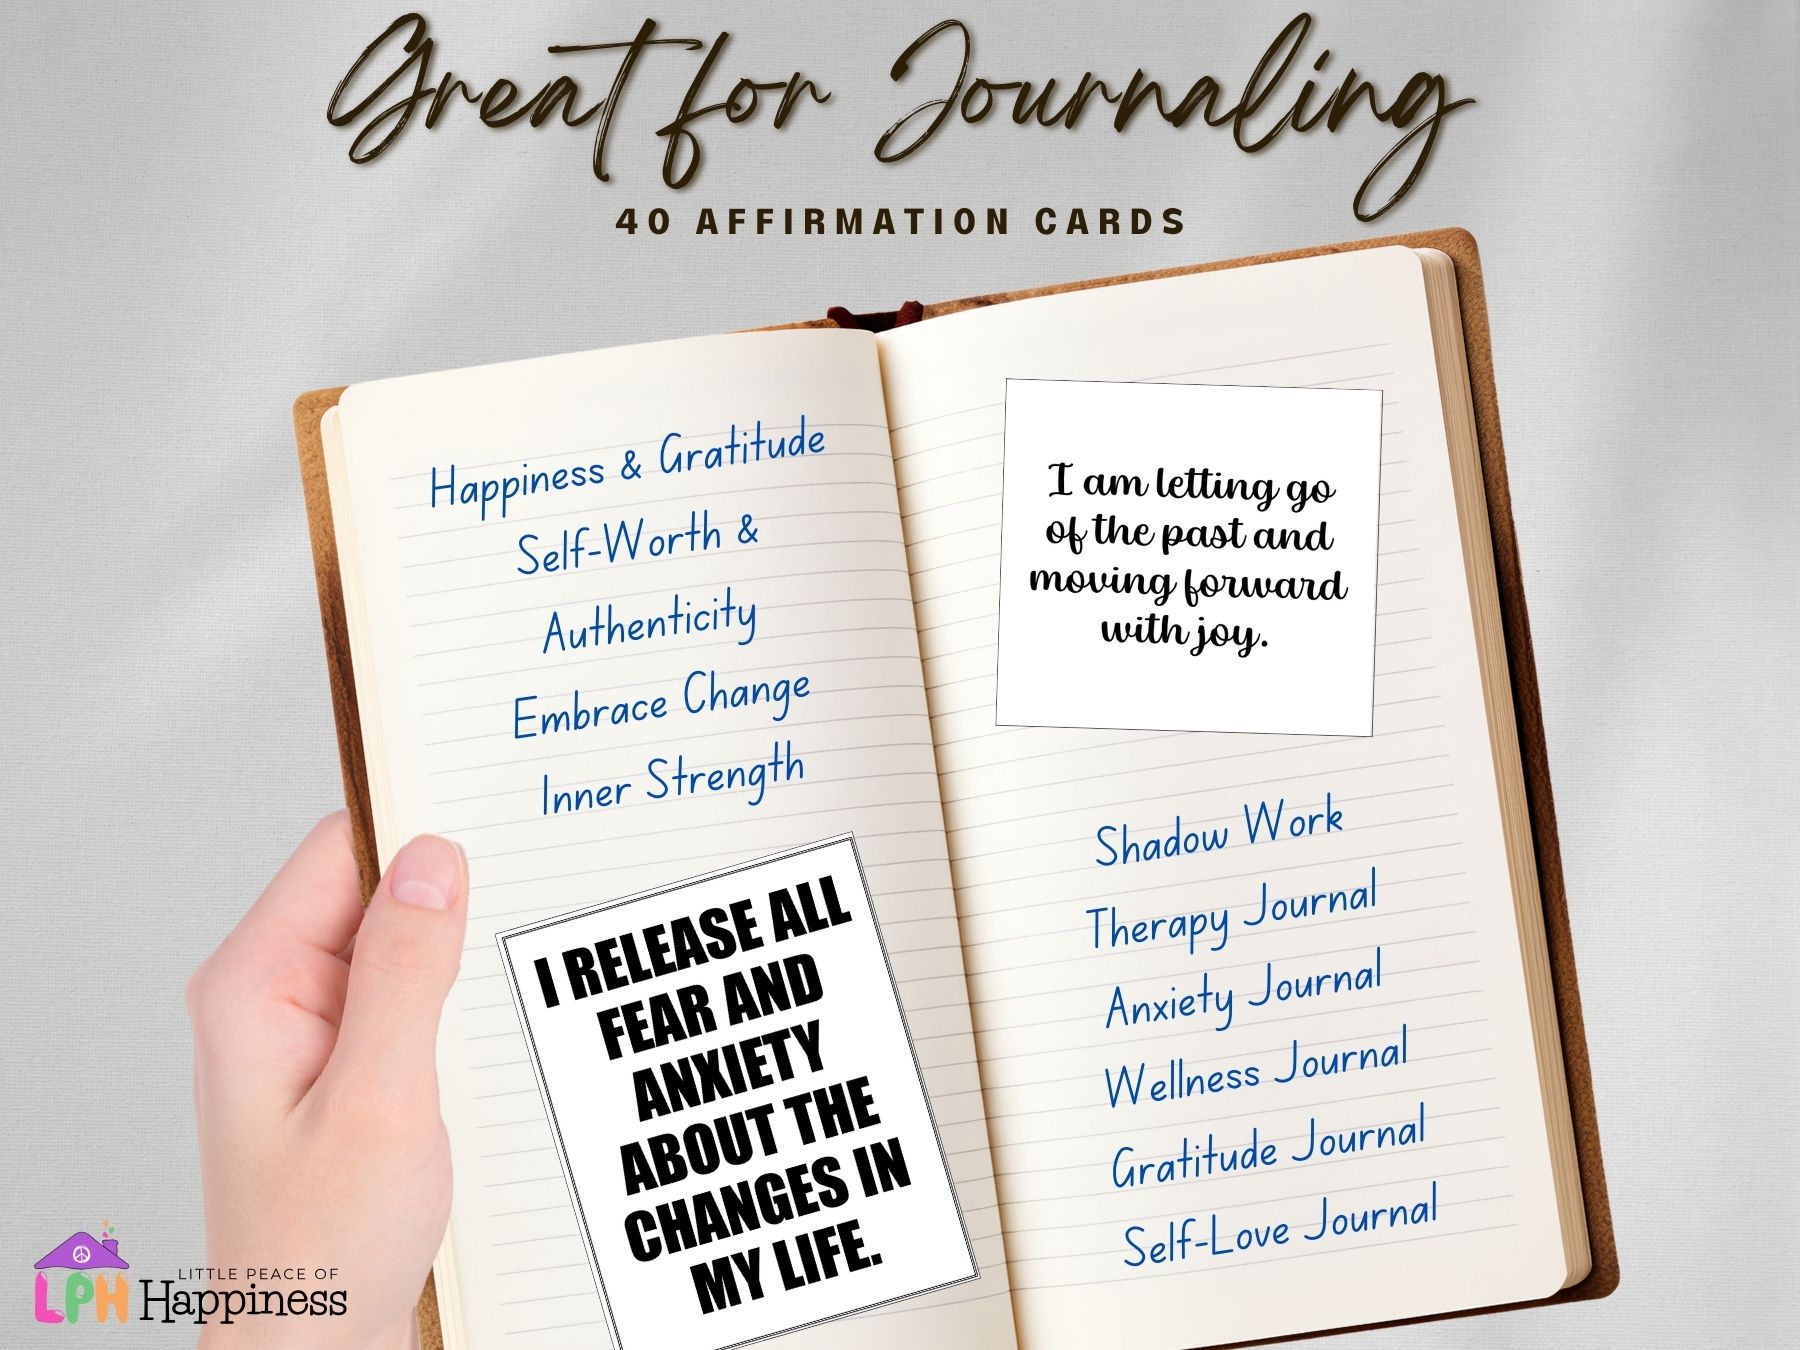 printable affirmation cards for women to boost self esteem and self care gift. Cards with words of encouragement. Life lessons inspired by nature to live happier.